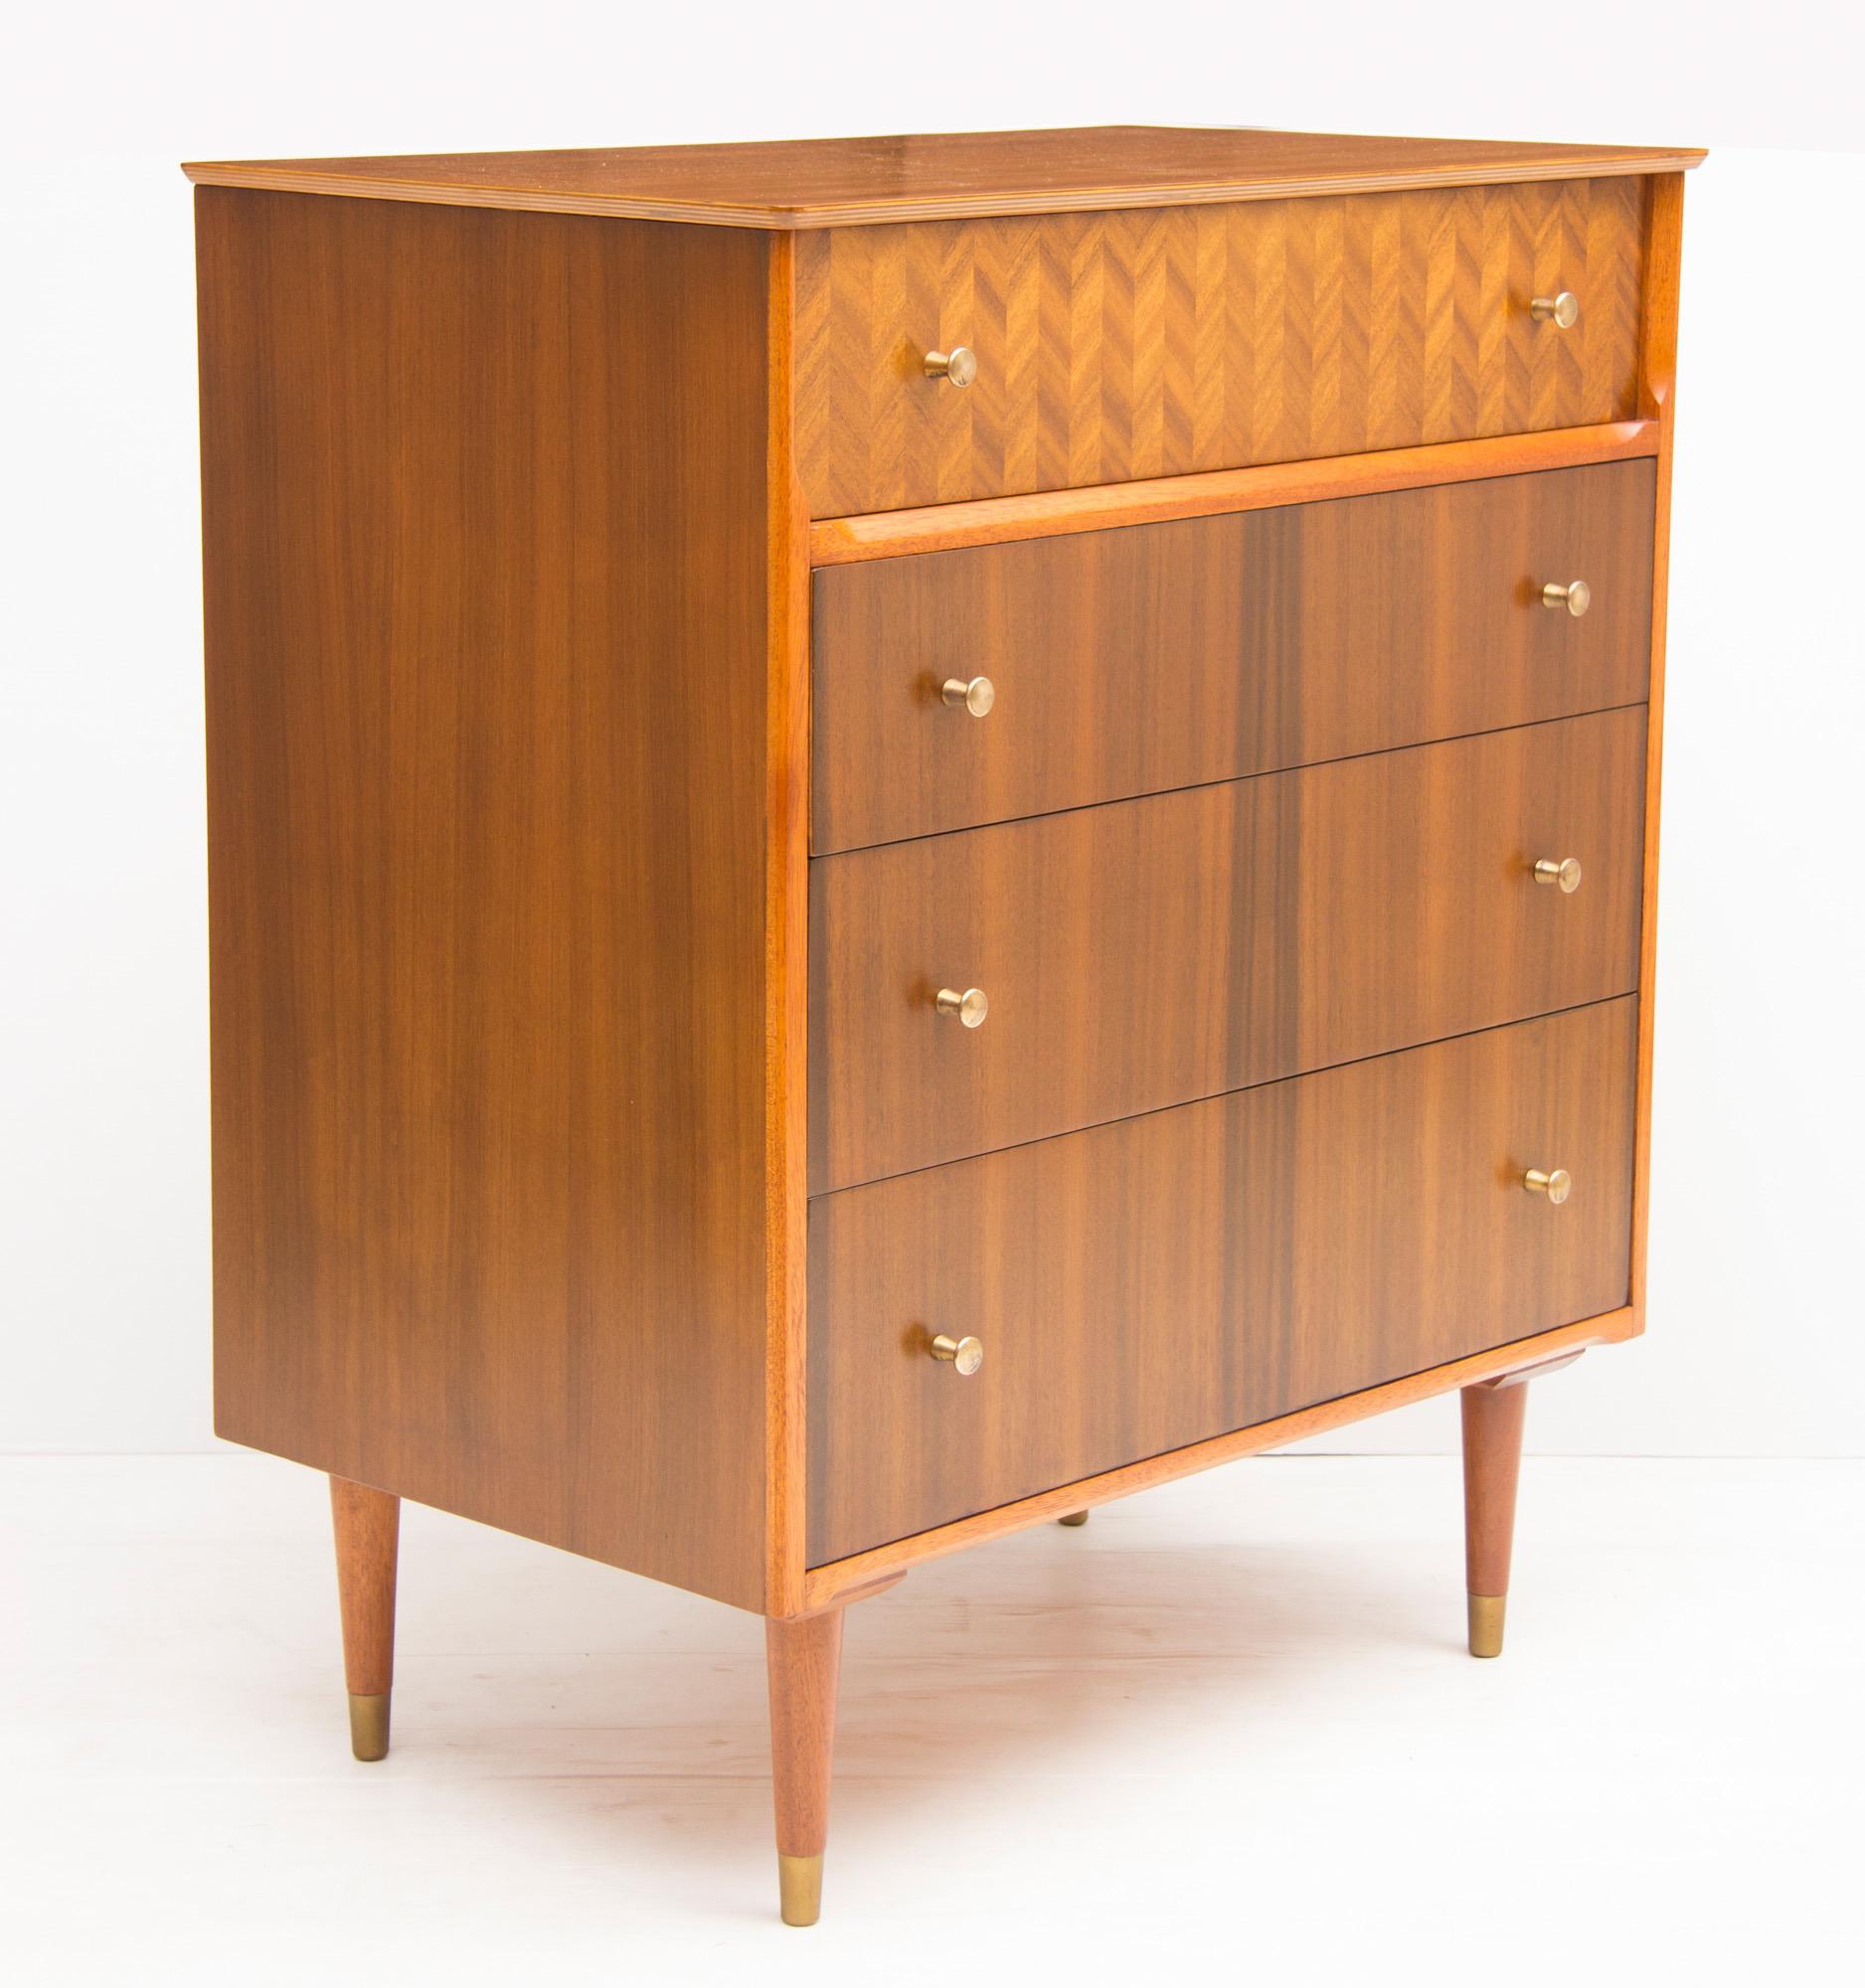 Midcentury walnut chest of drawers by Uniflex.
Midcentury chest of four drawers with brass knob handles
Top drawer has parquetry style veneer
Tapered legs with brass feet tips
Measures: H 93 cm, W 79 cm, D 47 cm
British, circa 1950.